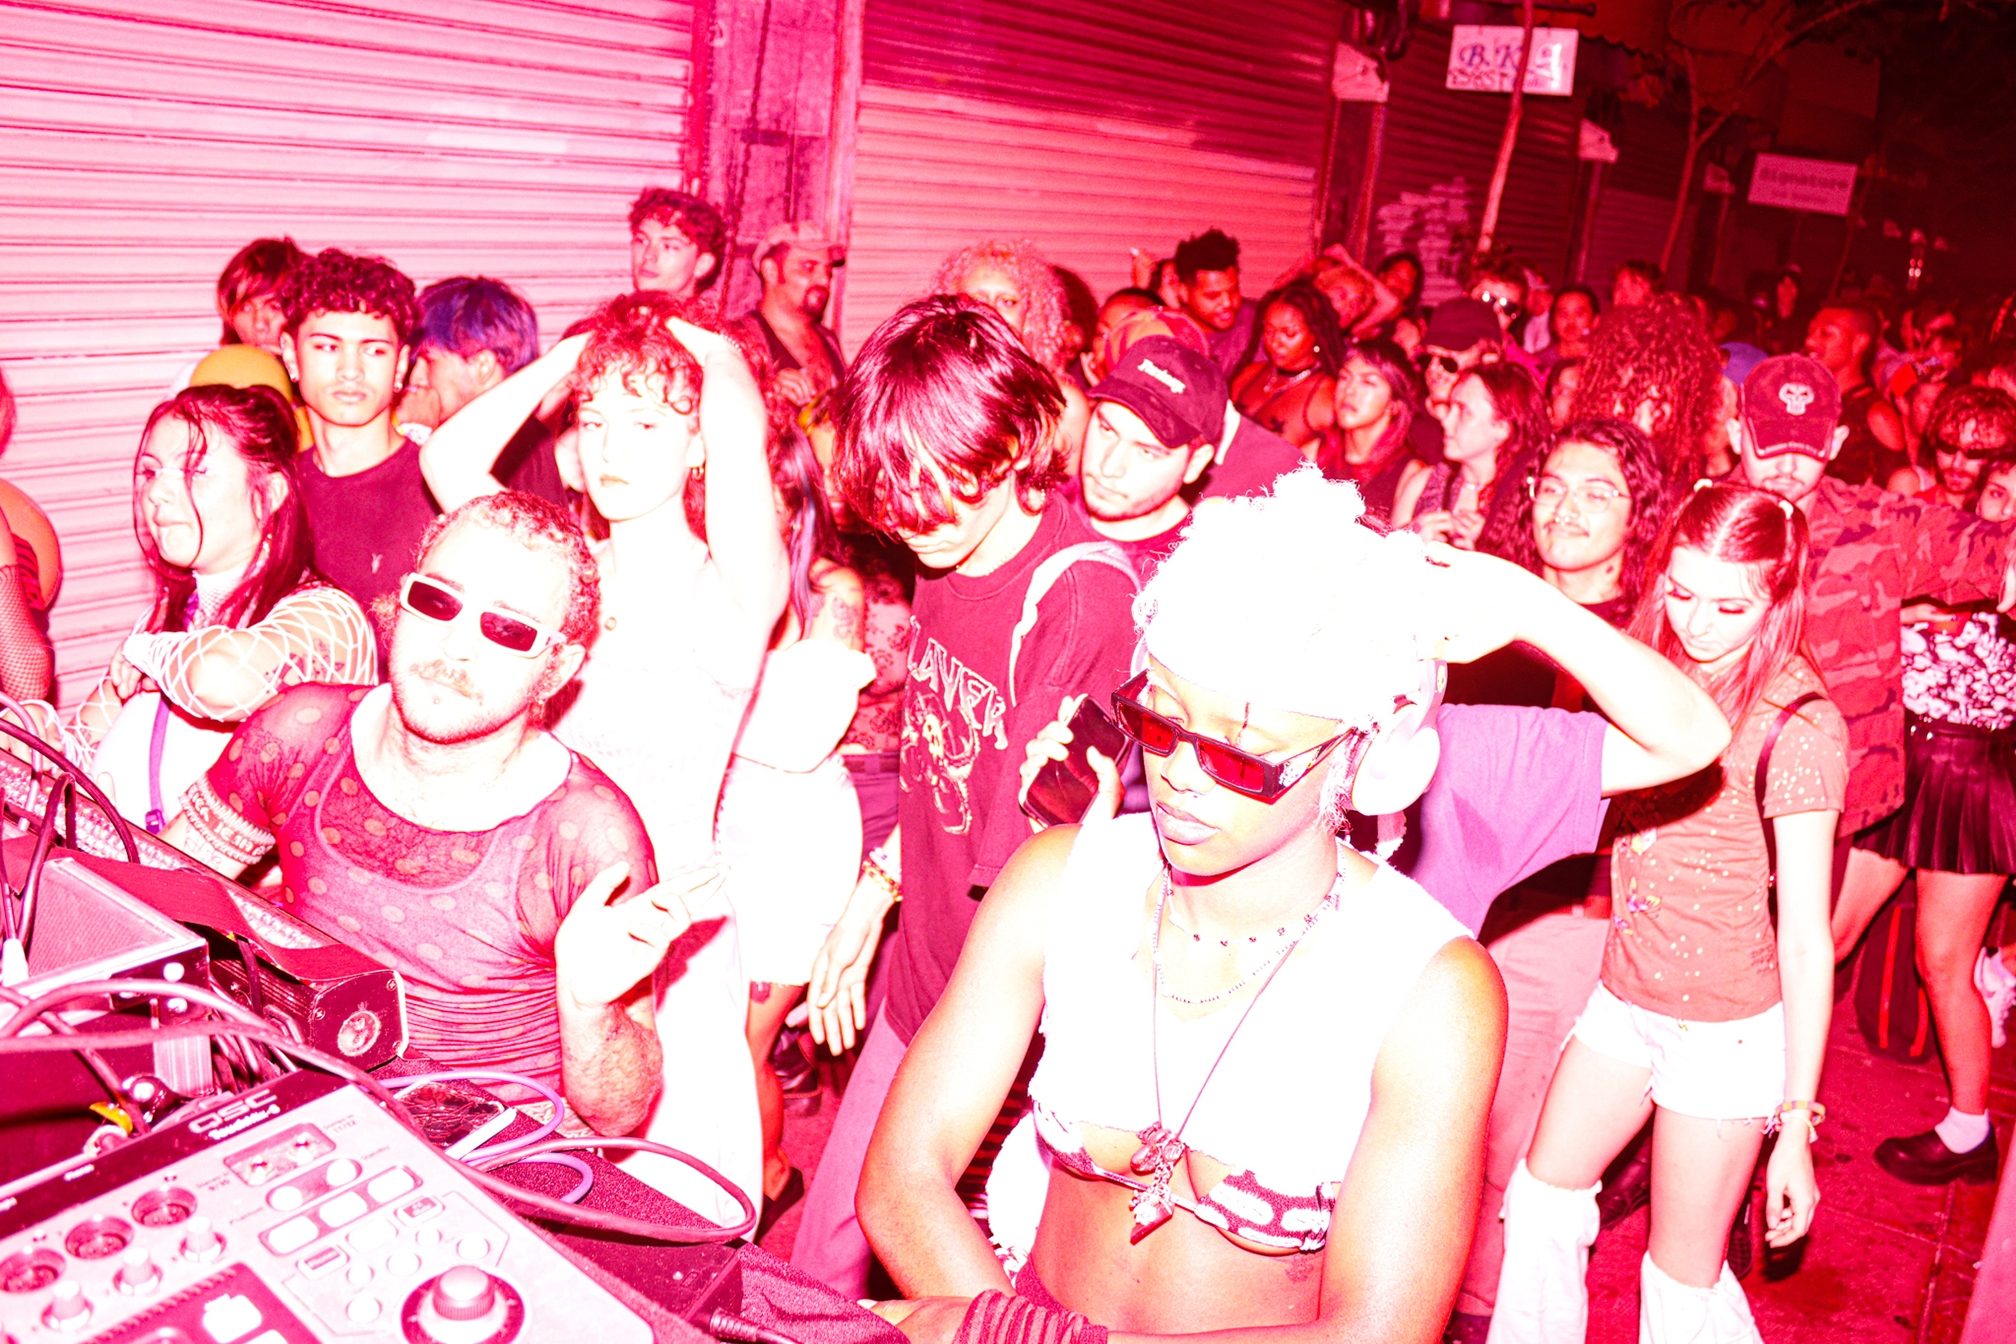 After the pandemic, LAs rave underground bounces back stronger - Features 